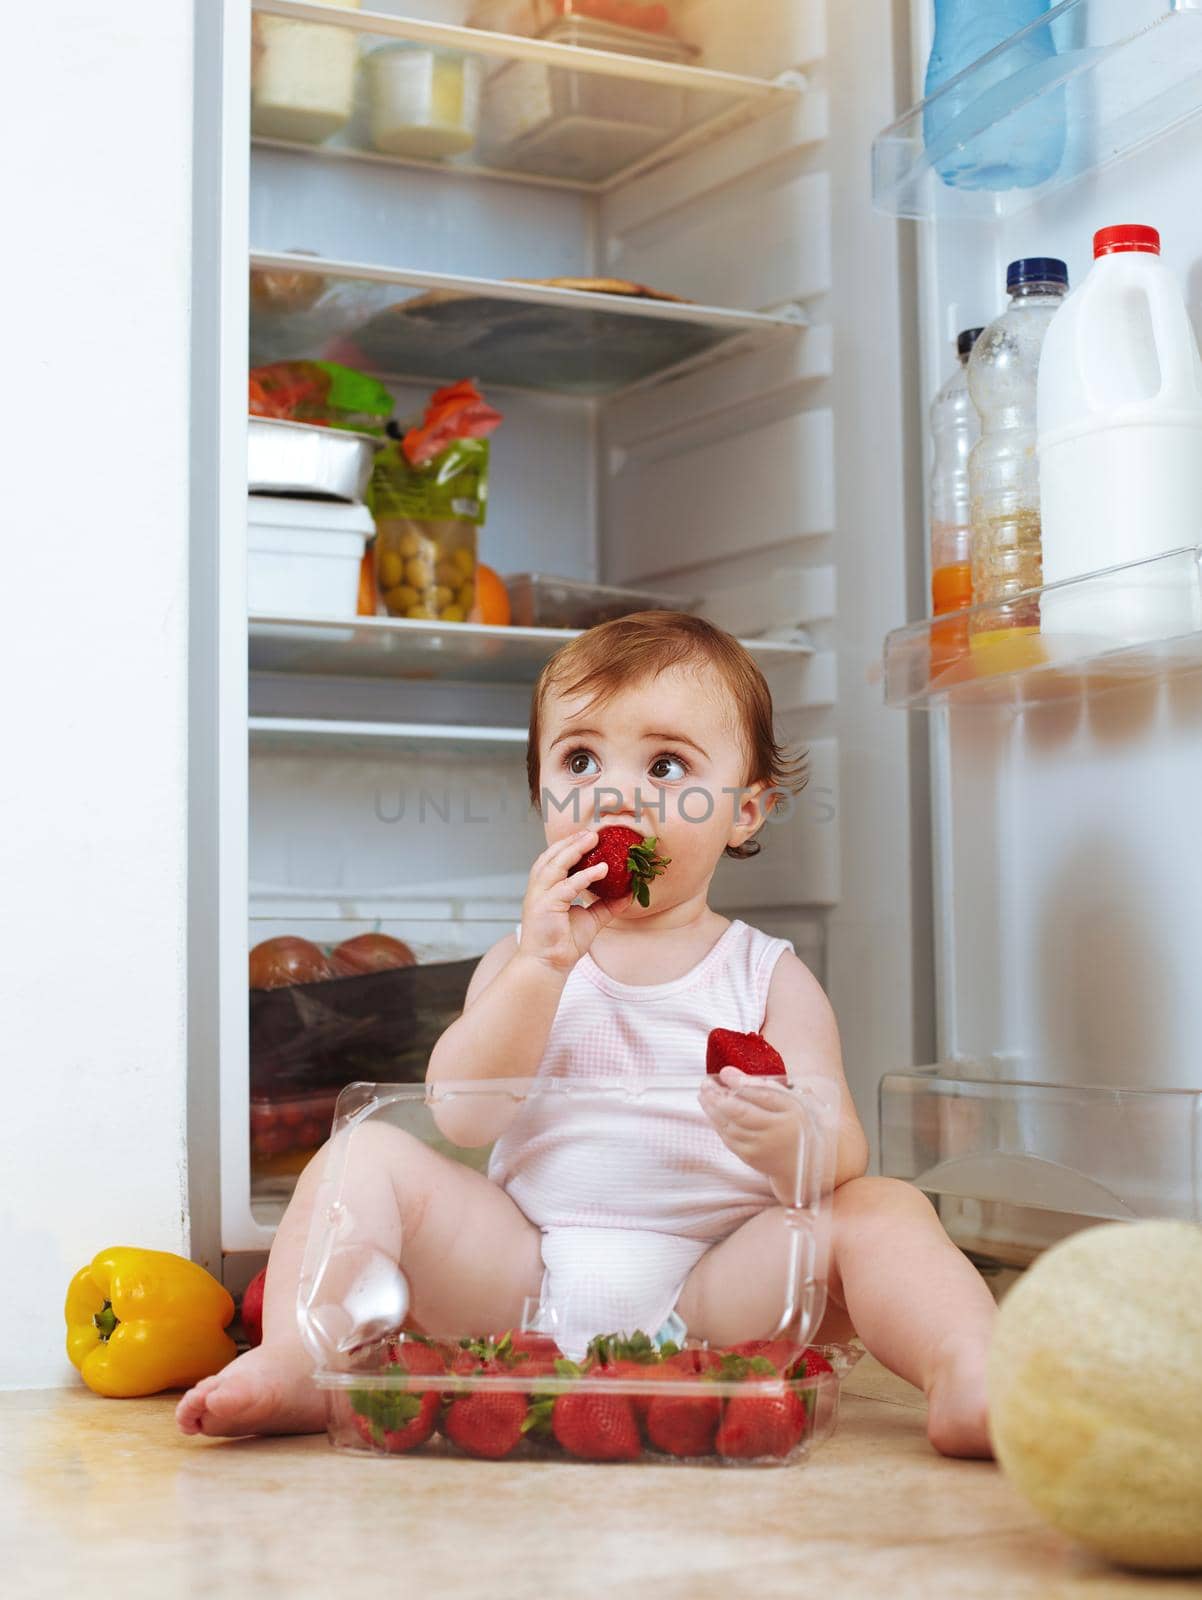 Shot of a toddler eating food from the fridge.